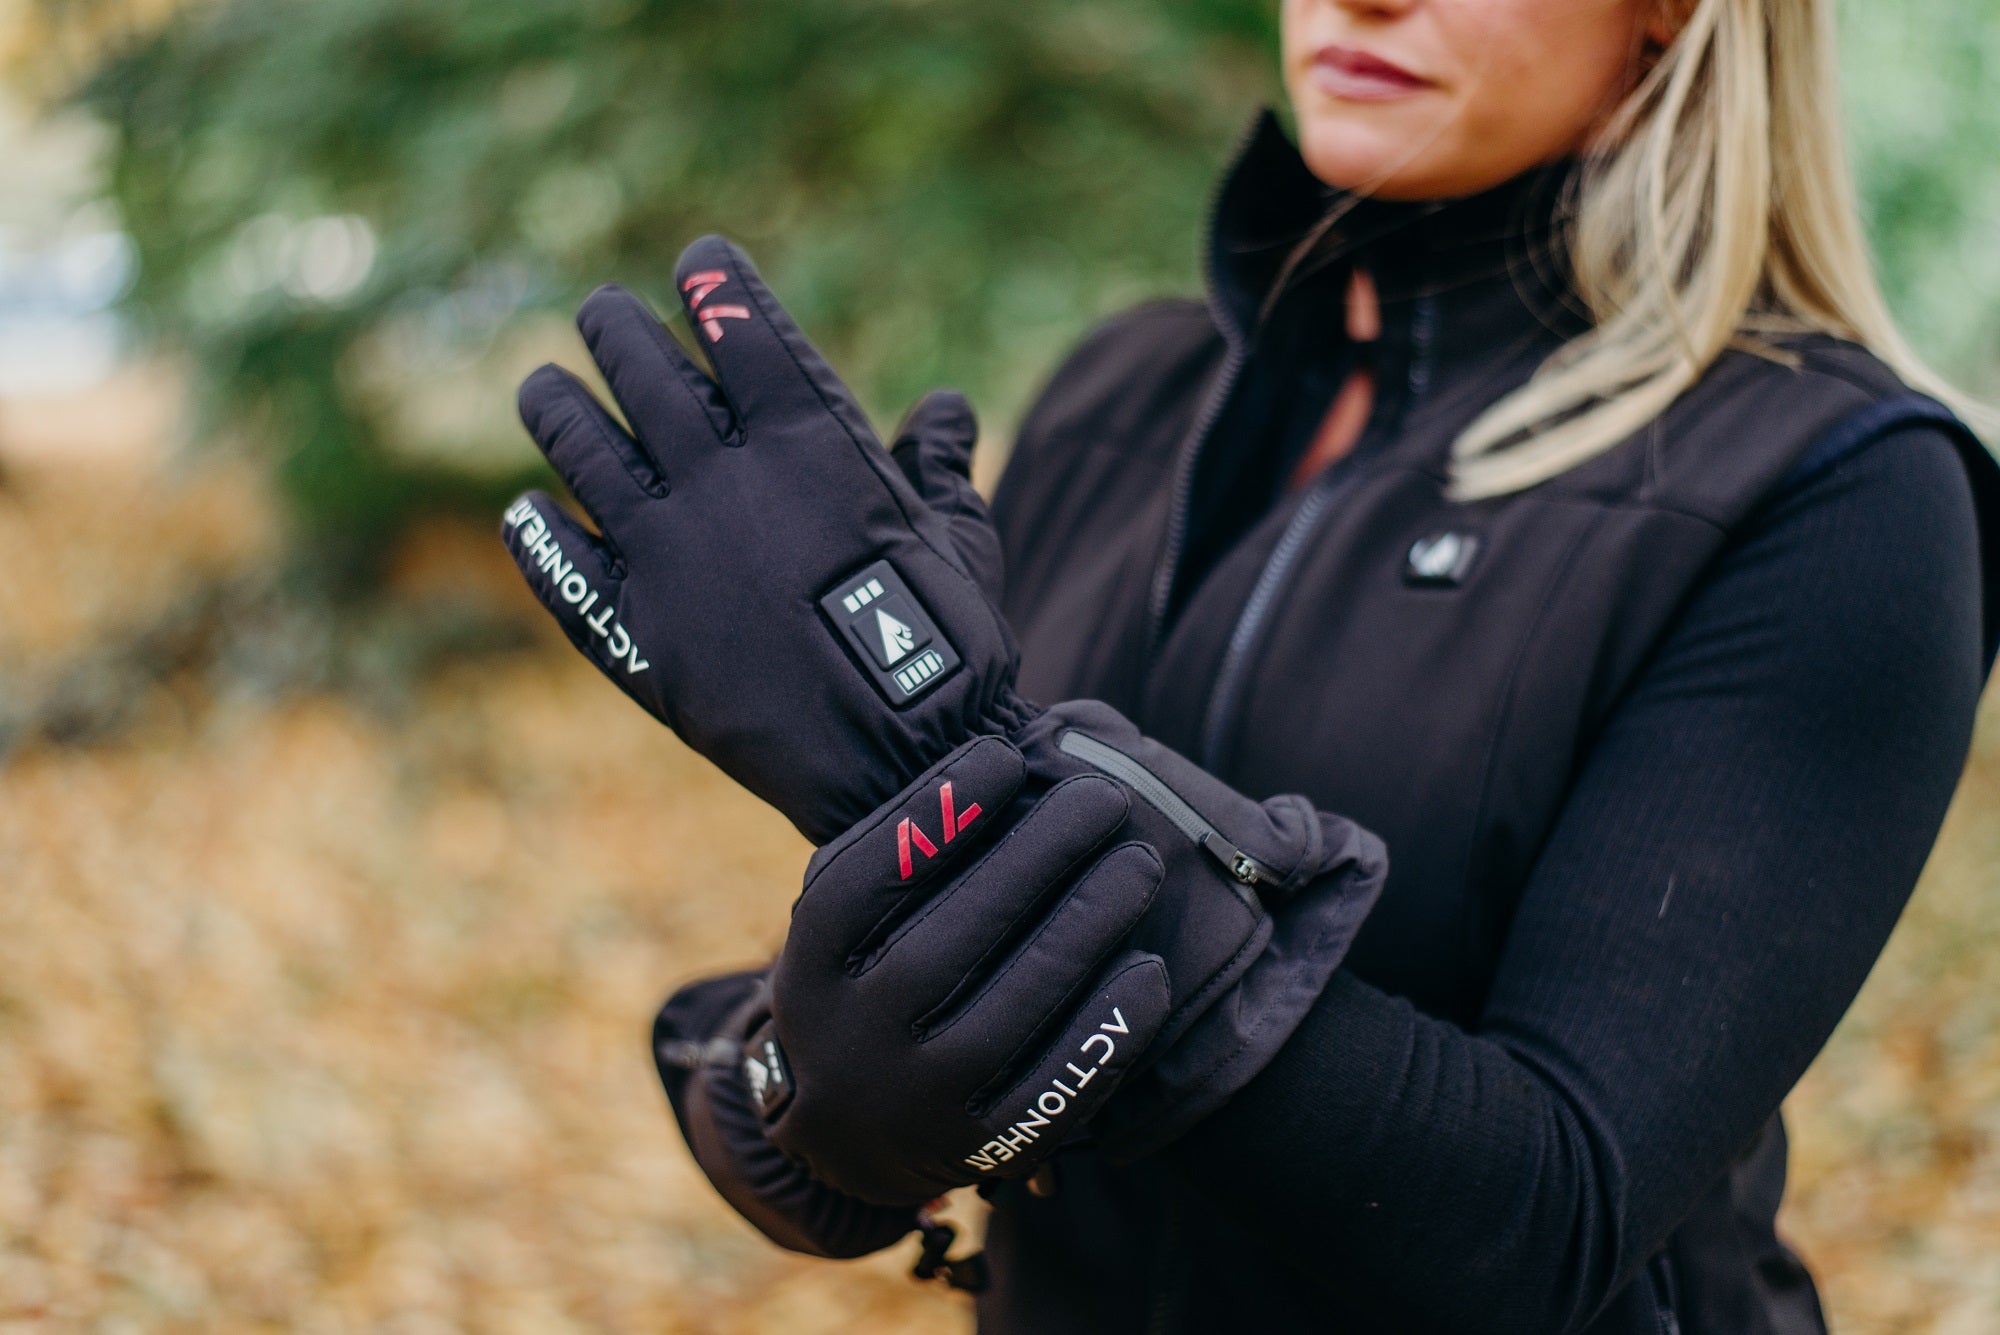 ActionHeat 5V Women's Heated Glove Liners – ActionHeat Heated Apparel